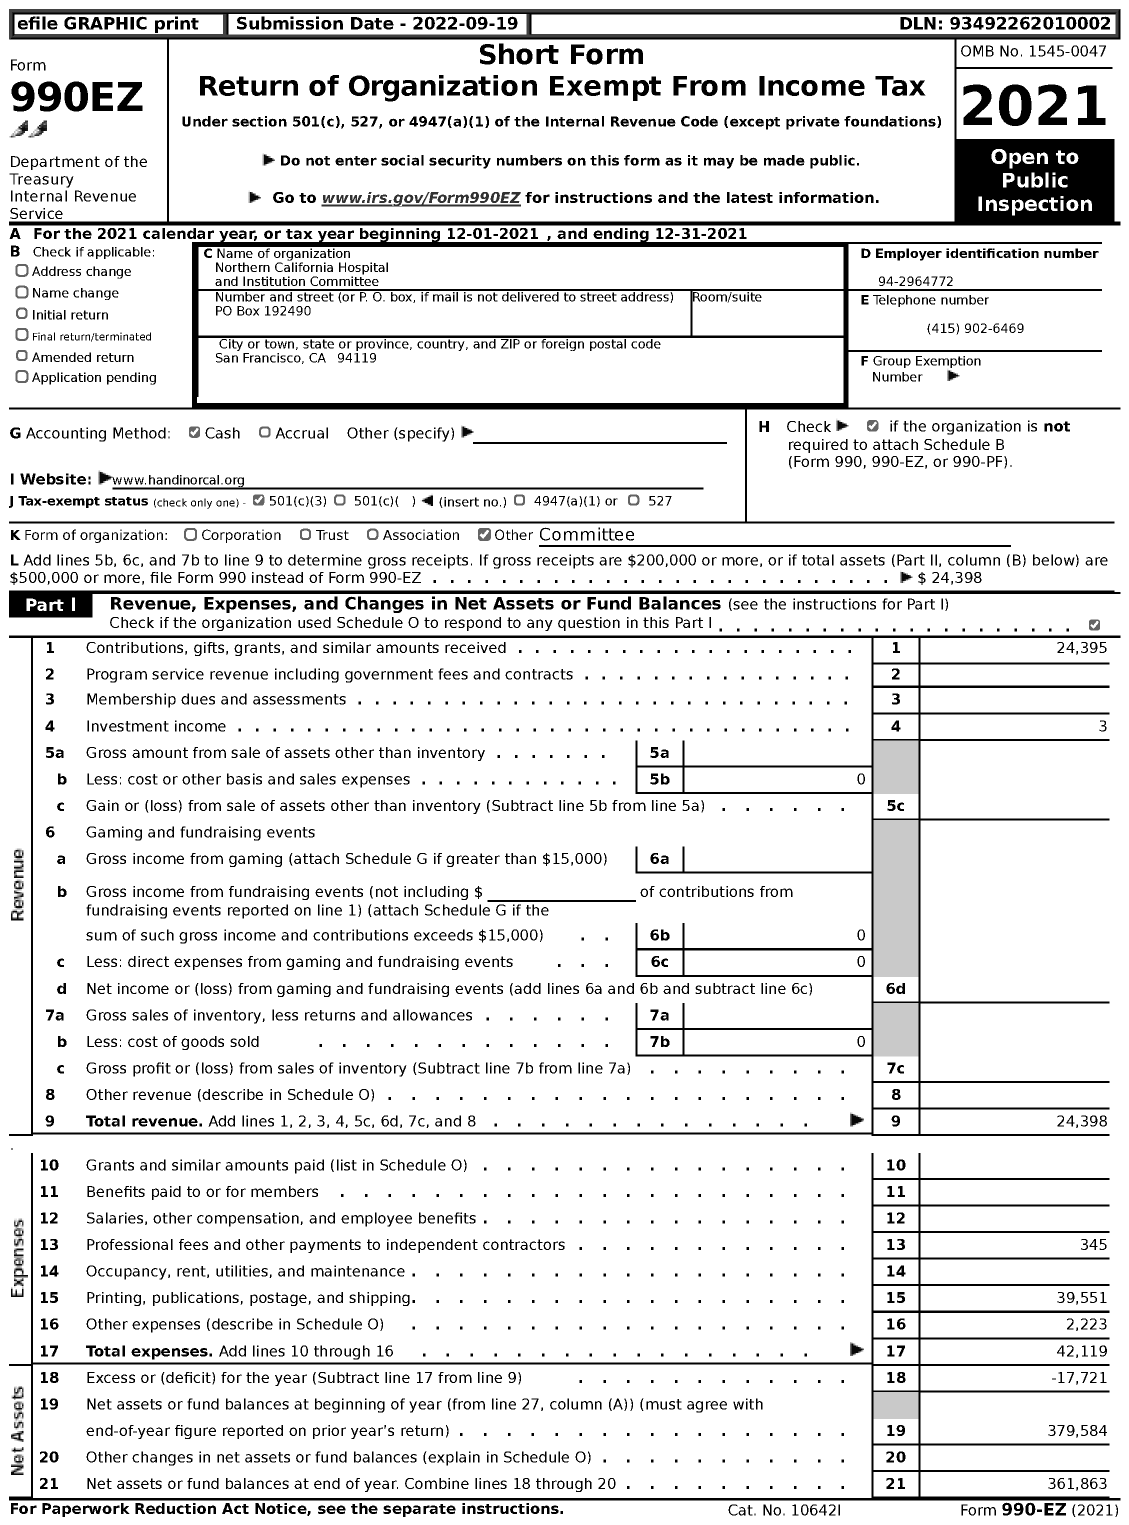 Image of first page of 2021 Form 990EZ for Northern California Hospital and Institution Committee